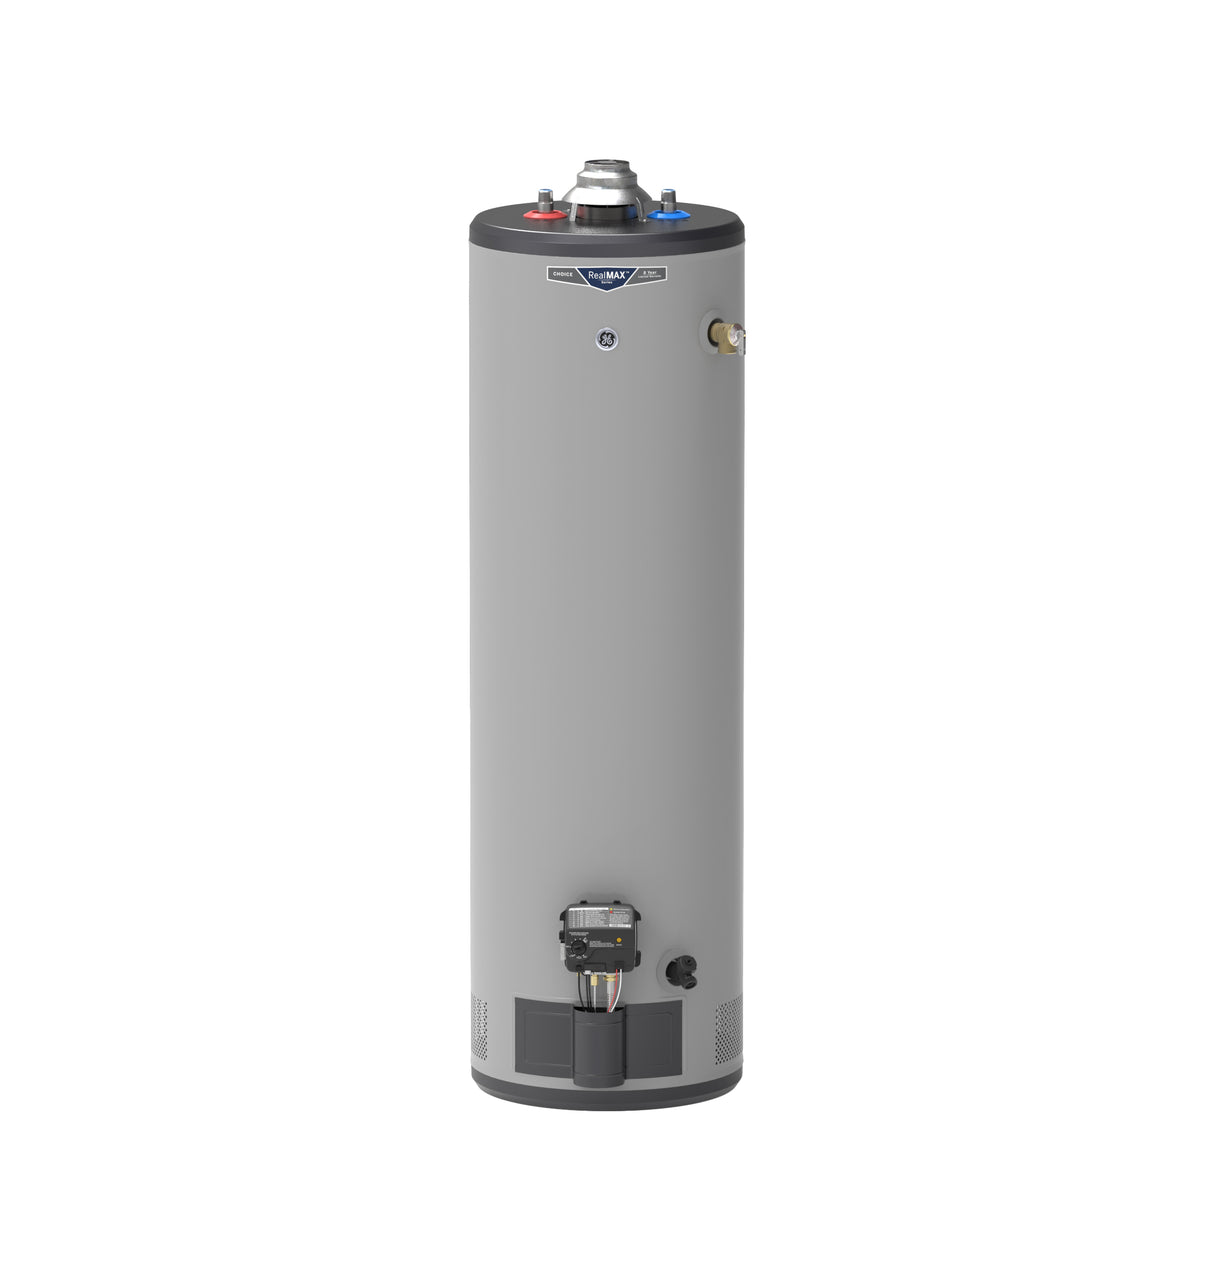 GE RealMAX Choice 30-Gallon Tall Natural Gas Atmospheric Water Heater - (GG30T08BXR)